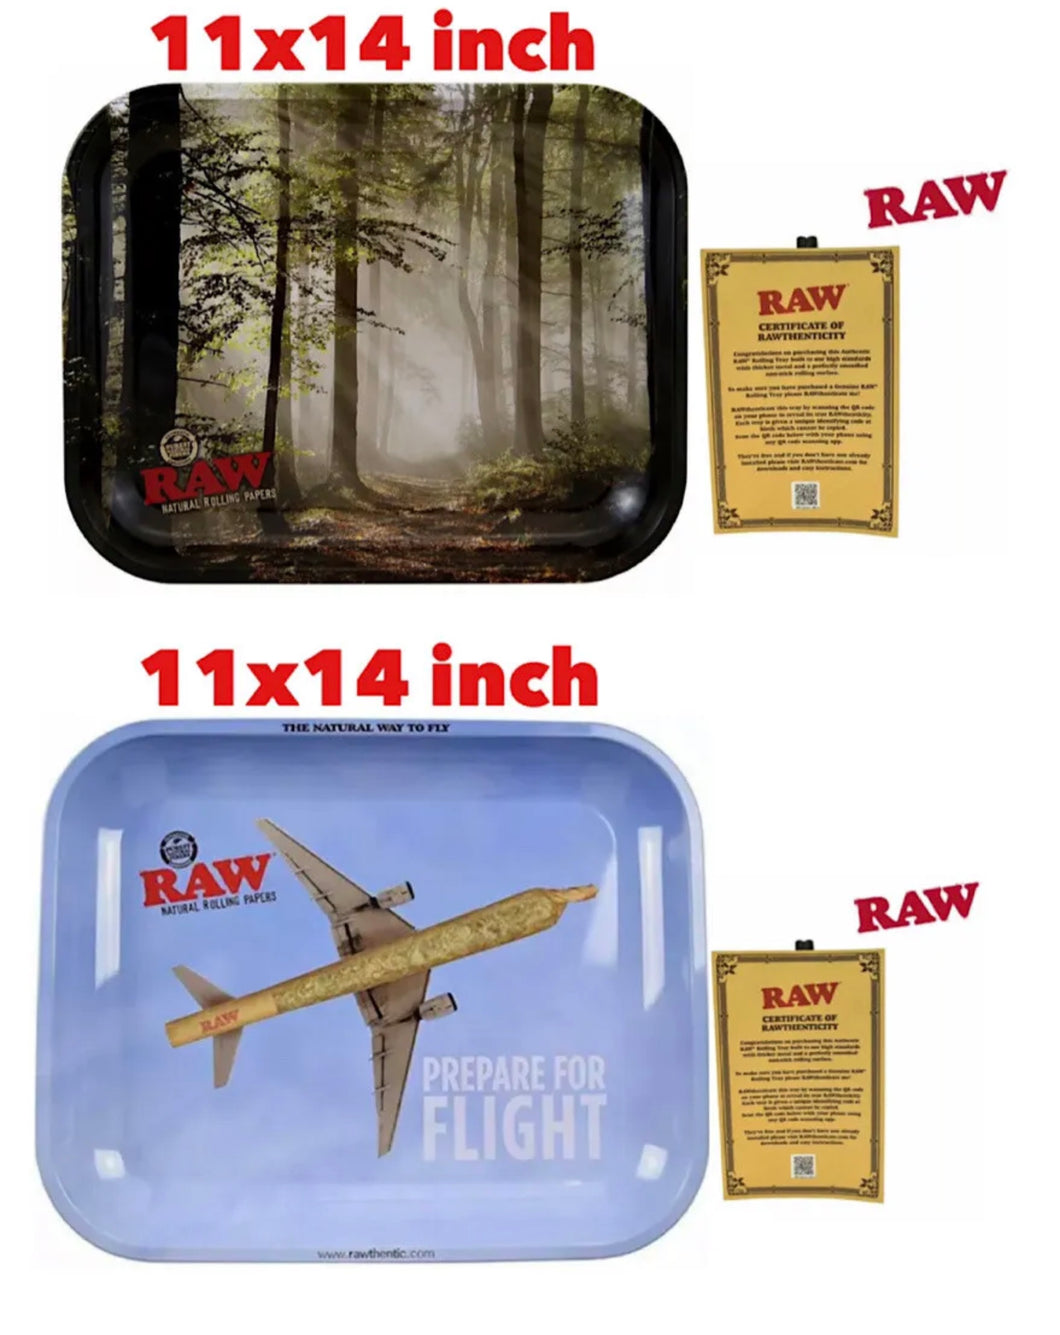 RAW FOREST & FLIGHT metal rolling tray(14x11 inch) LARGE (2 packs)